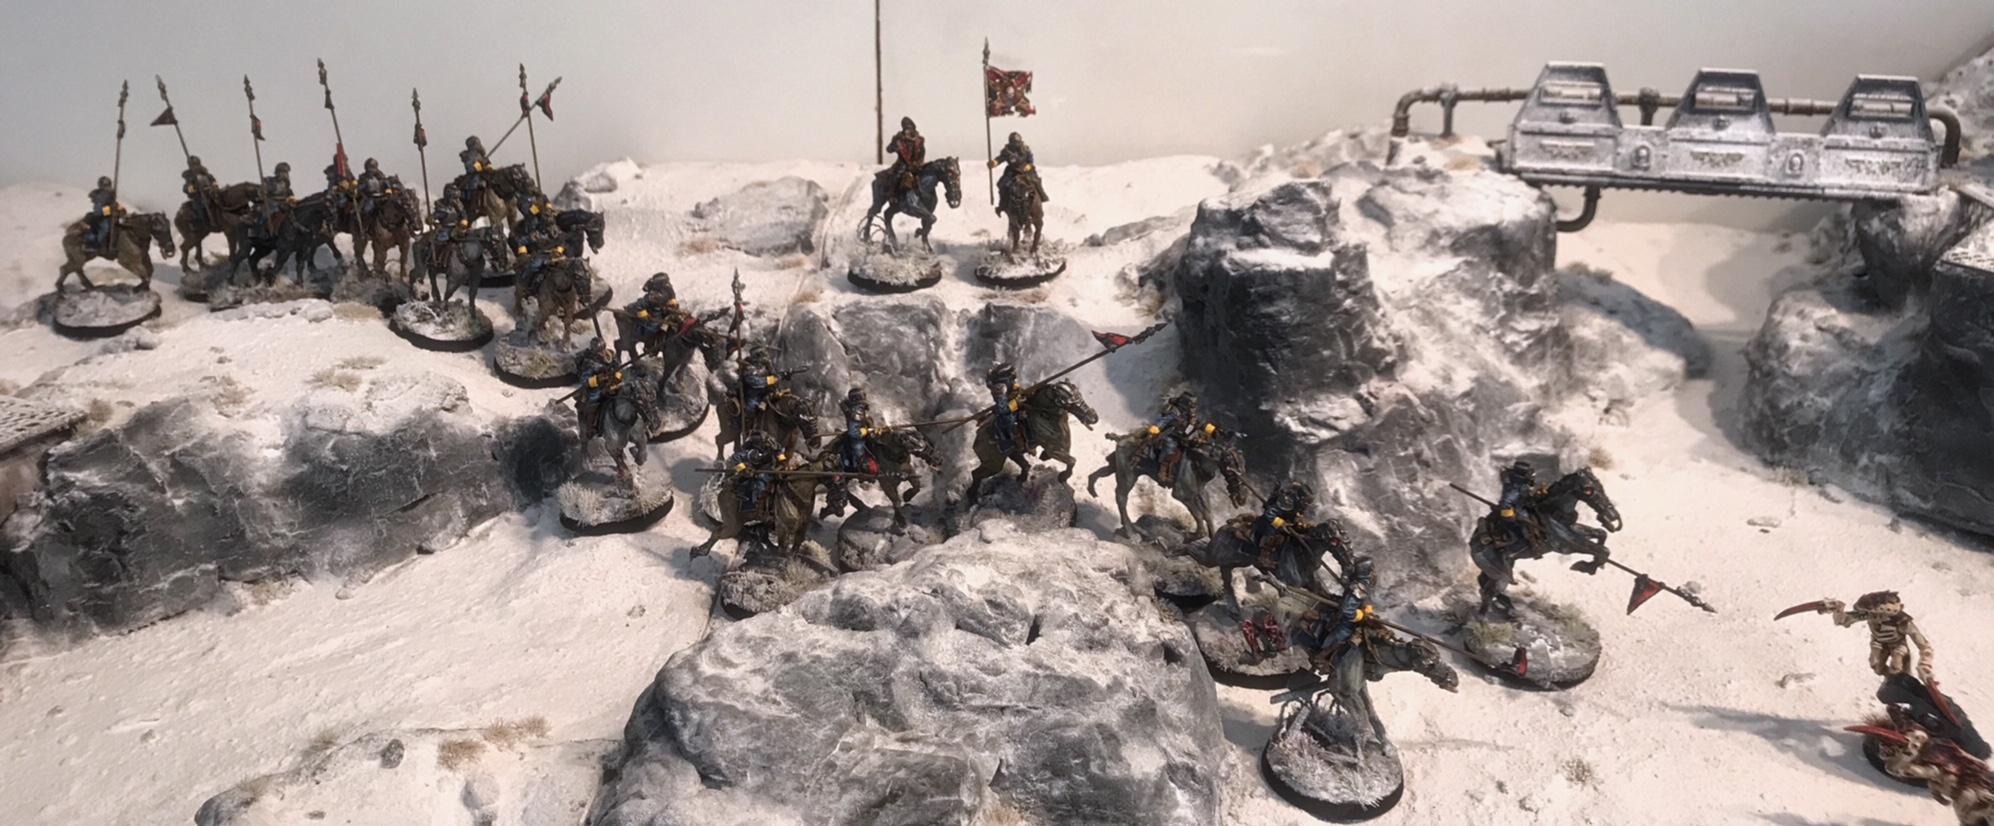 Cavalry charge in the snow